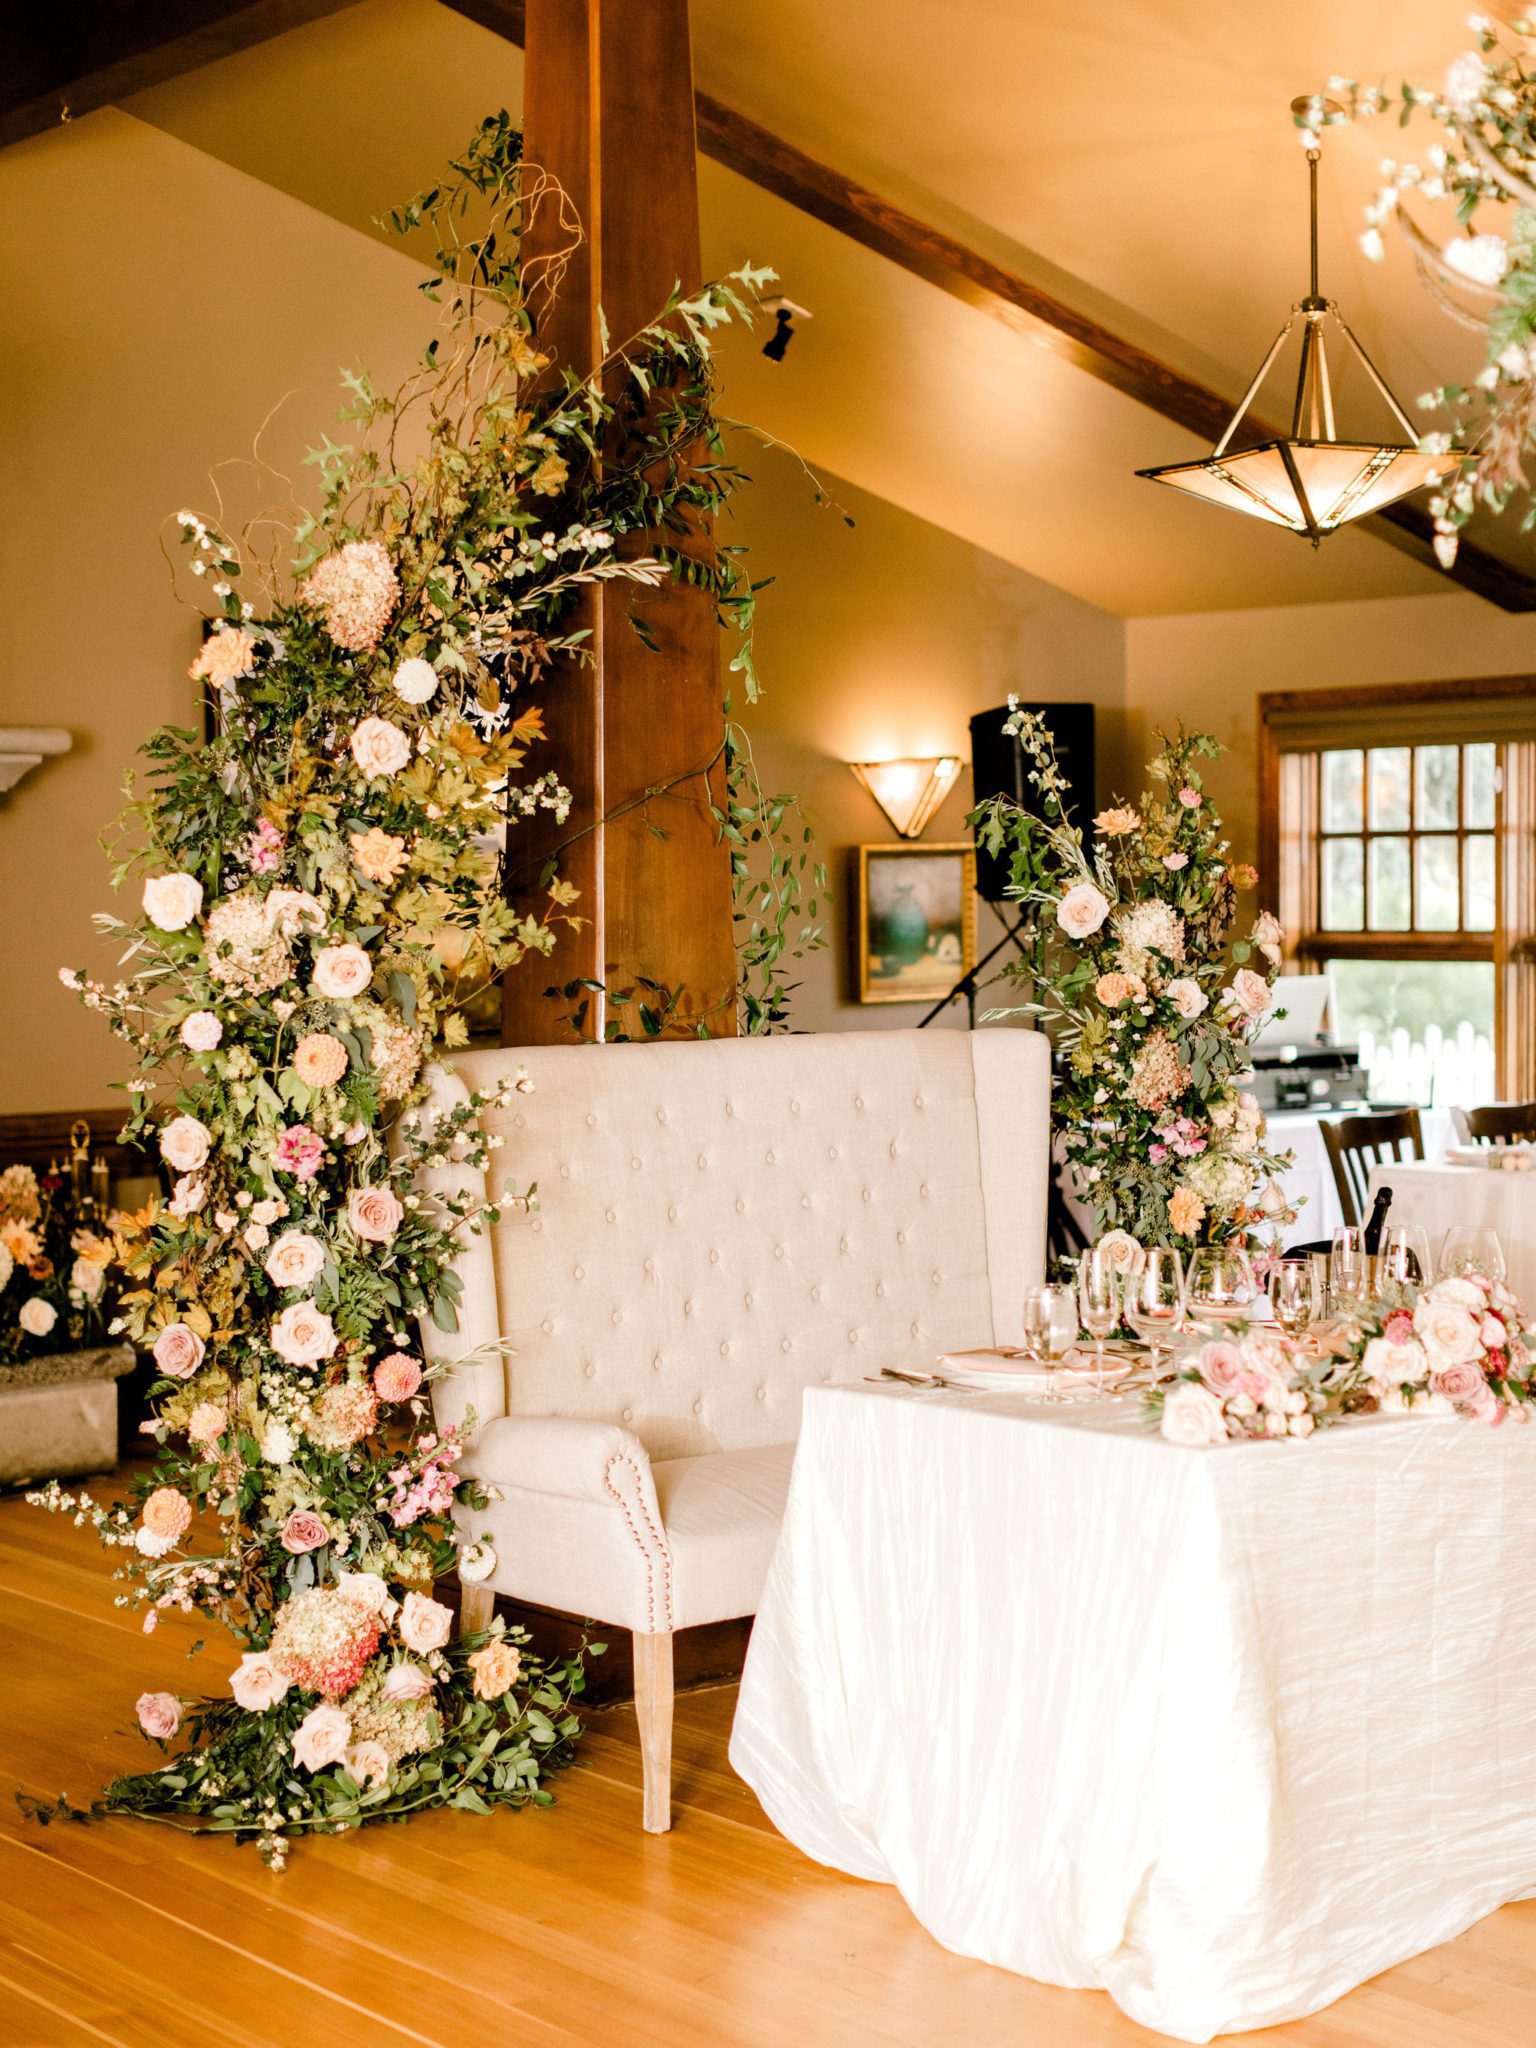 Lavish sweetheart table decor inspiration with stunning florals